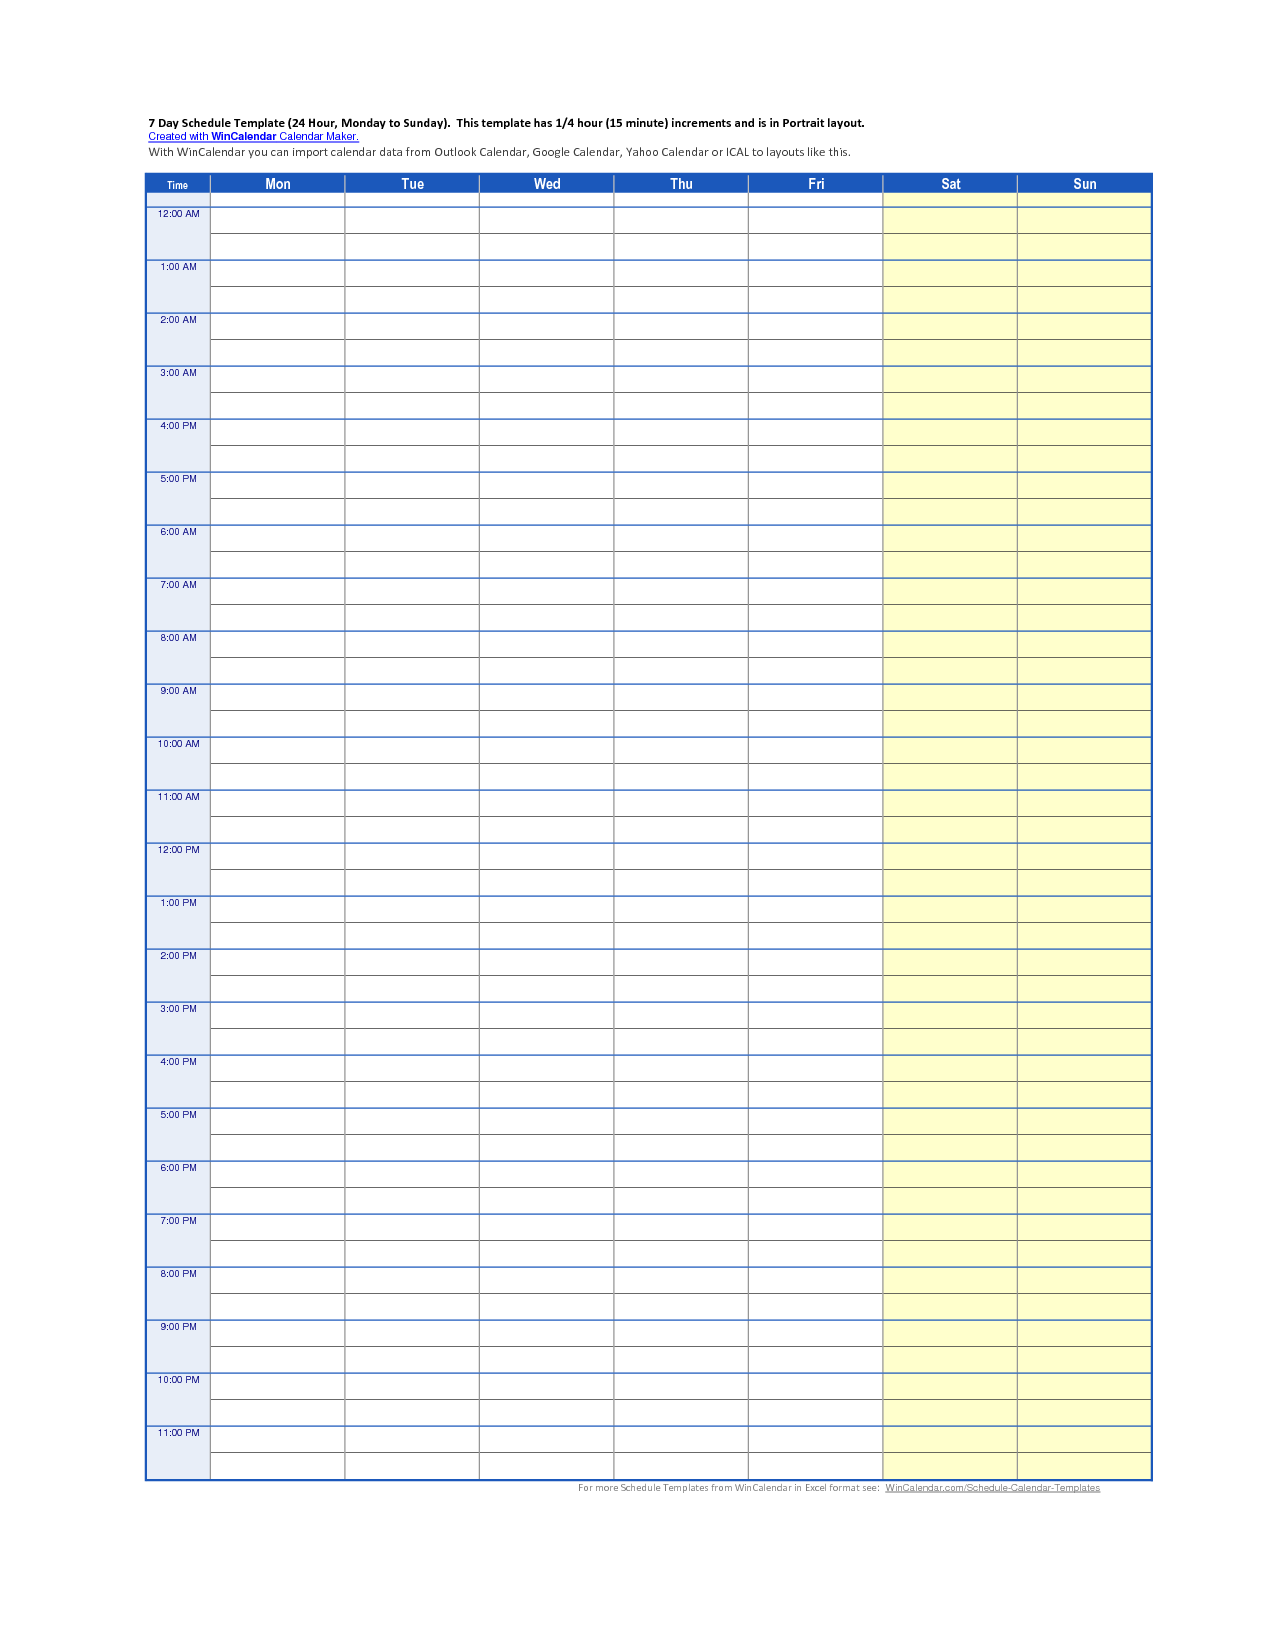 printable-15-minute-schedule-template